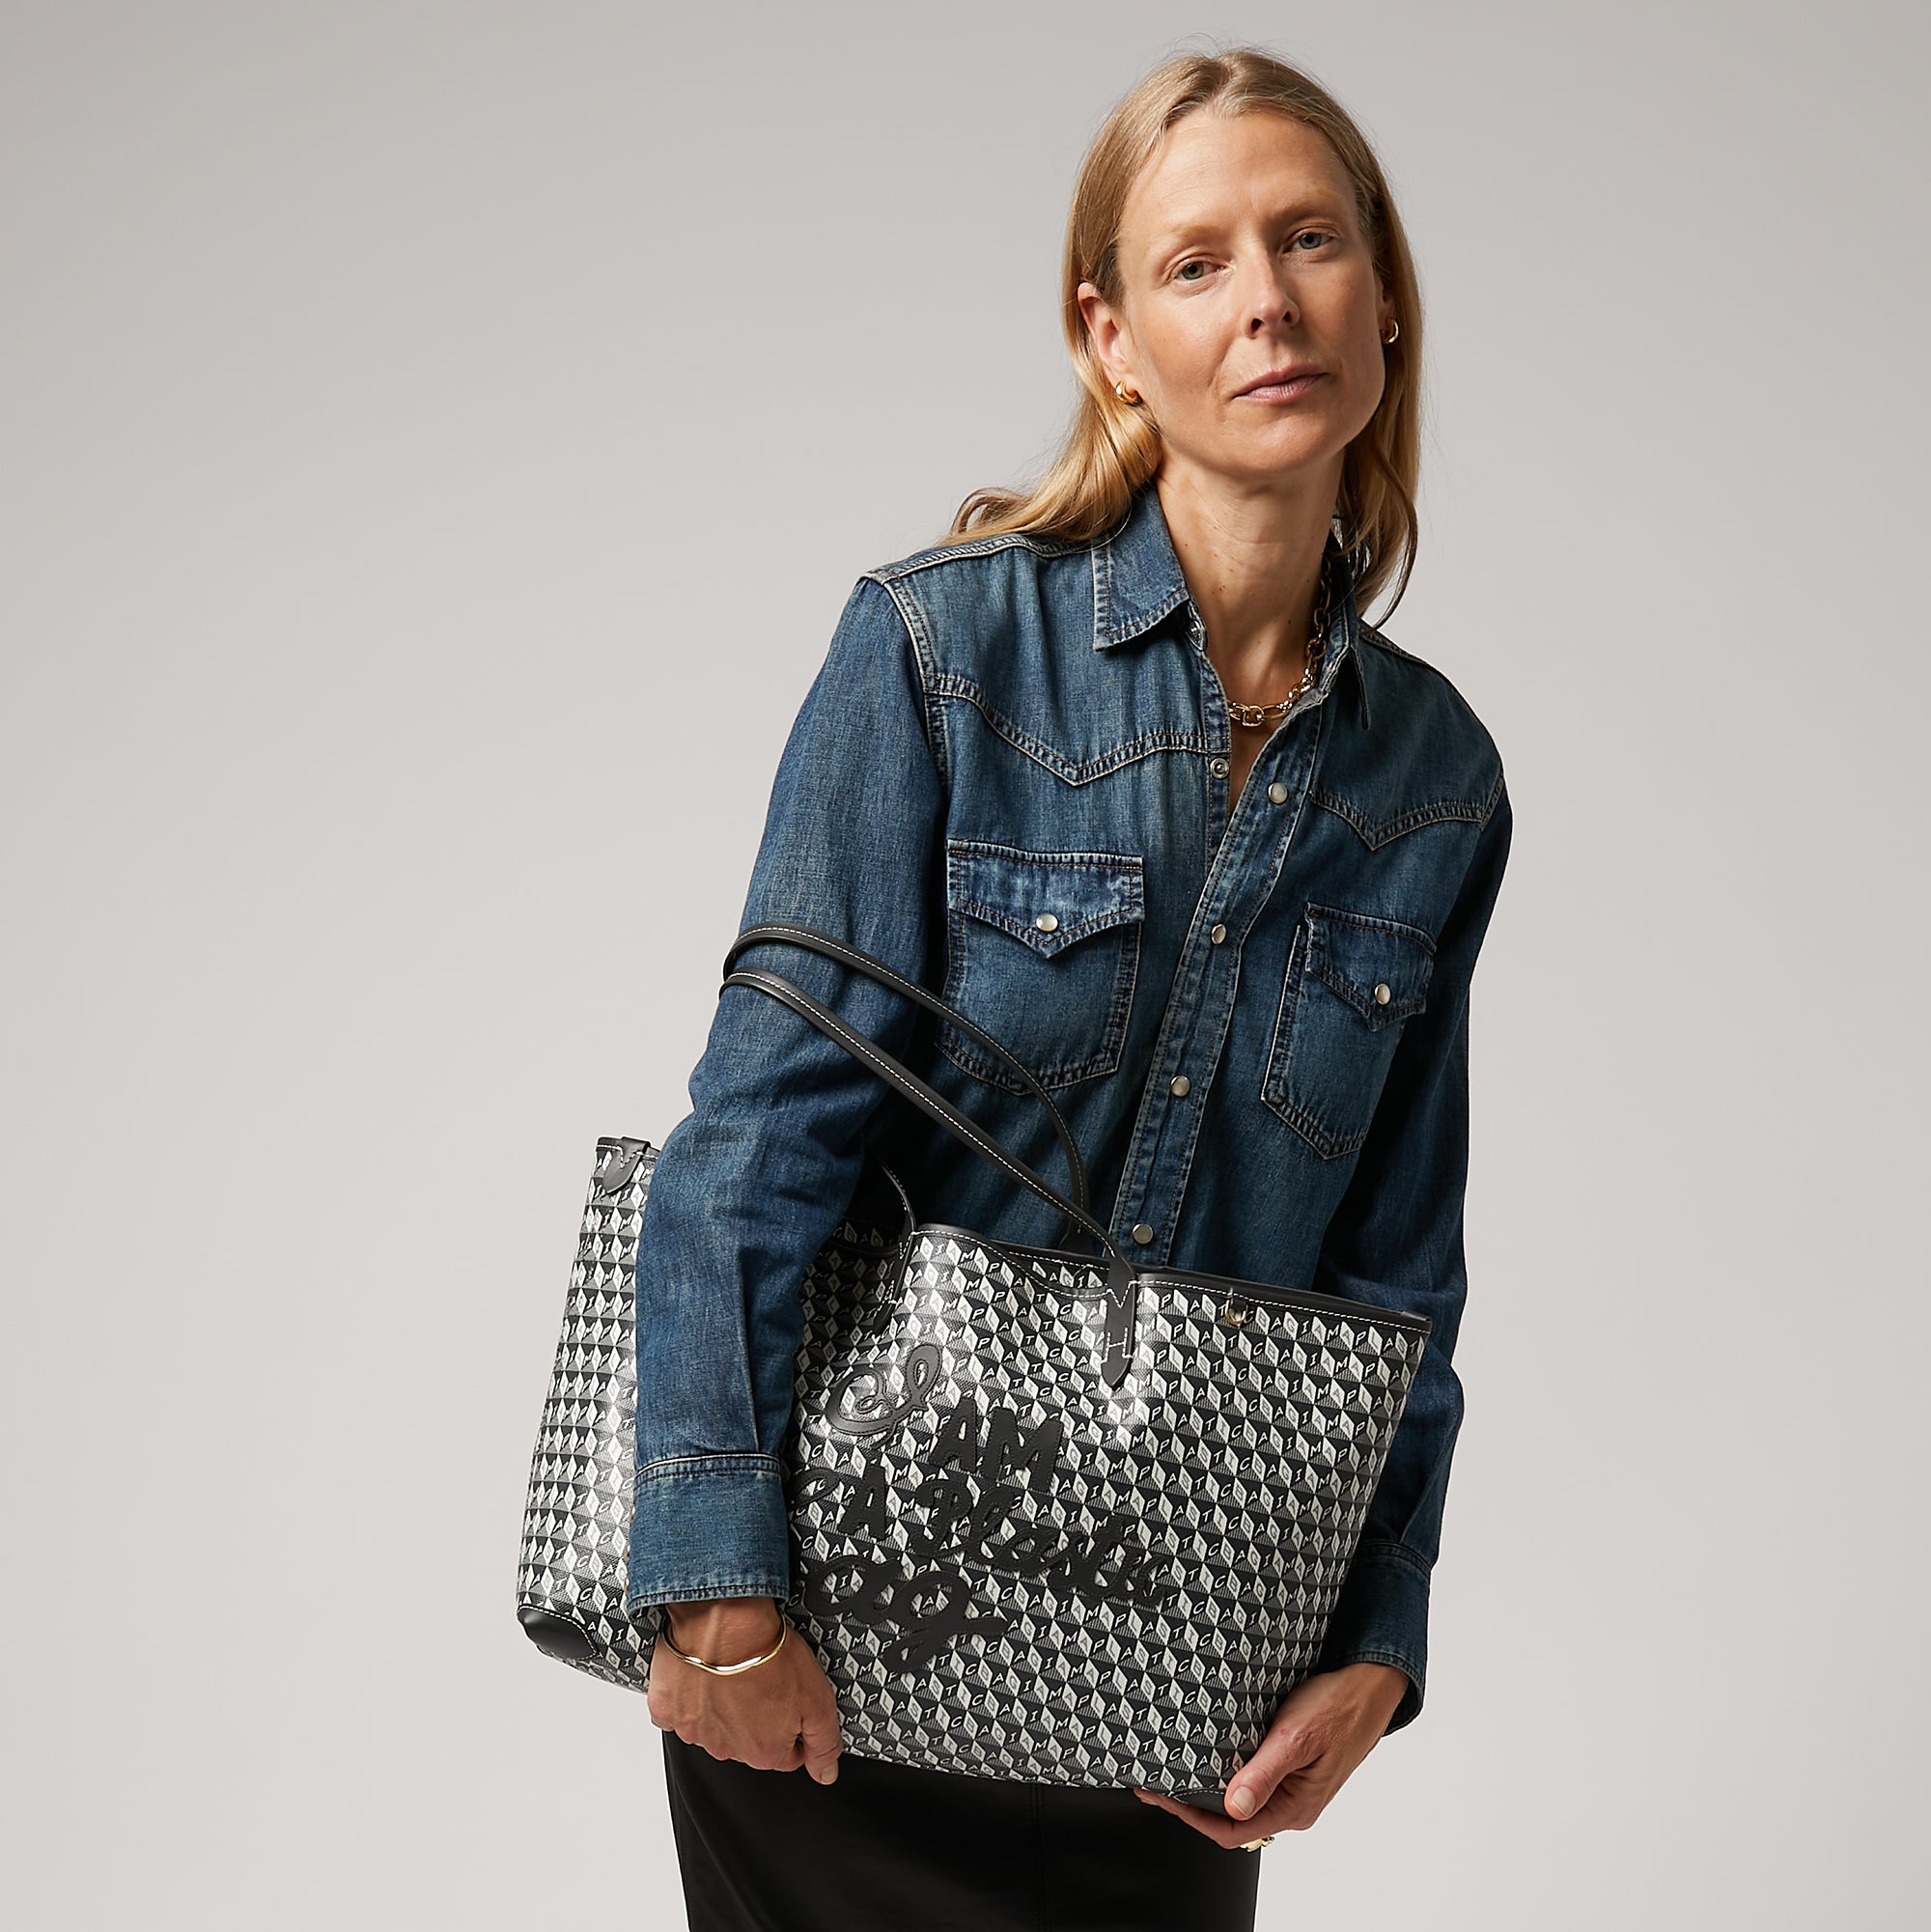 I Am A Plastic Bag Motif Tote -

                  
                    Recycled Coated Canvas in Charcoal -
                  

                  Anya Hindmarch UK
